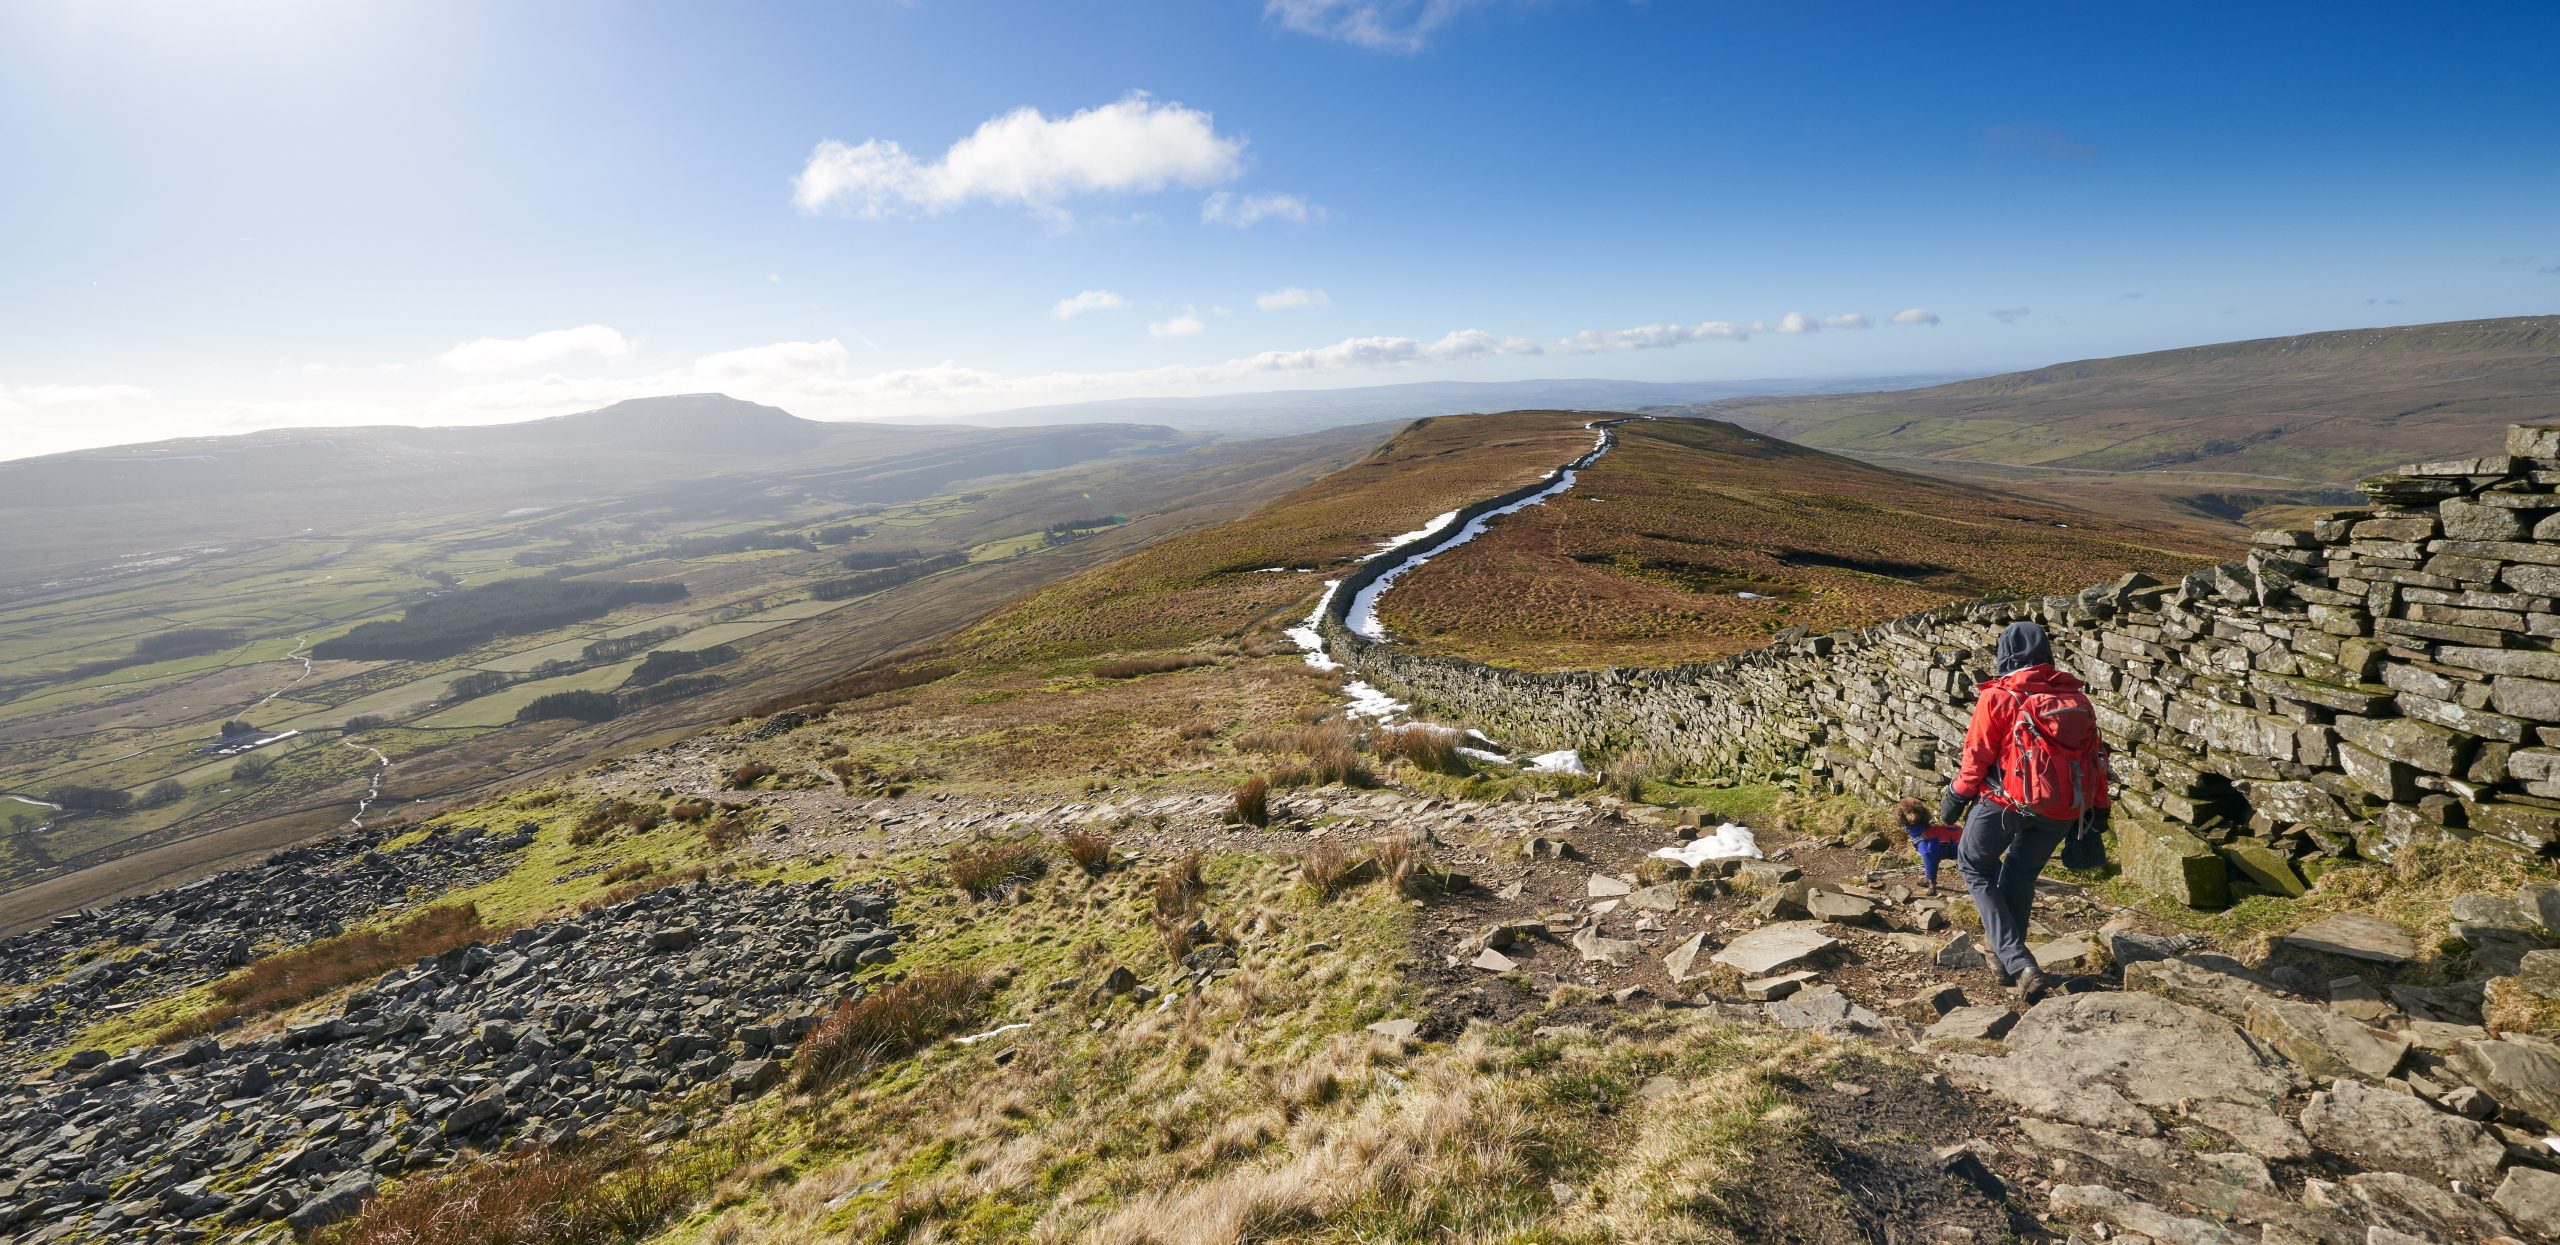 Chancery and Commercial Director will be taking part in the Yorkshire Three Peaks